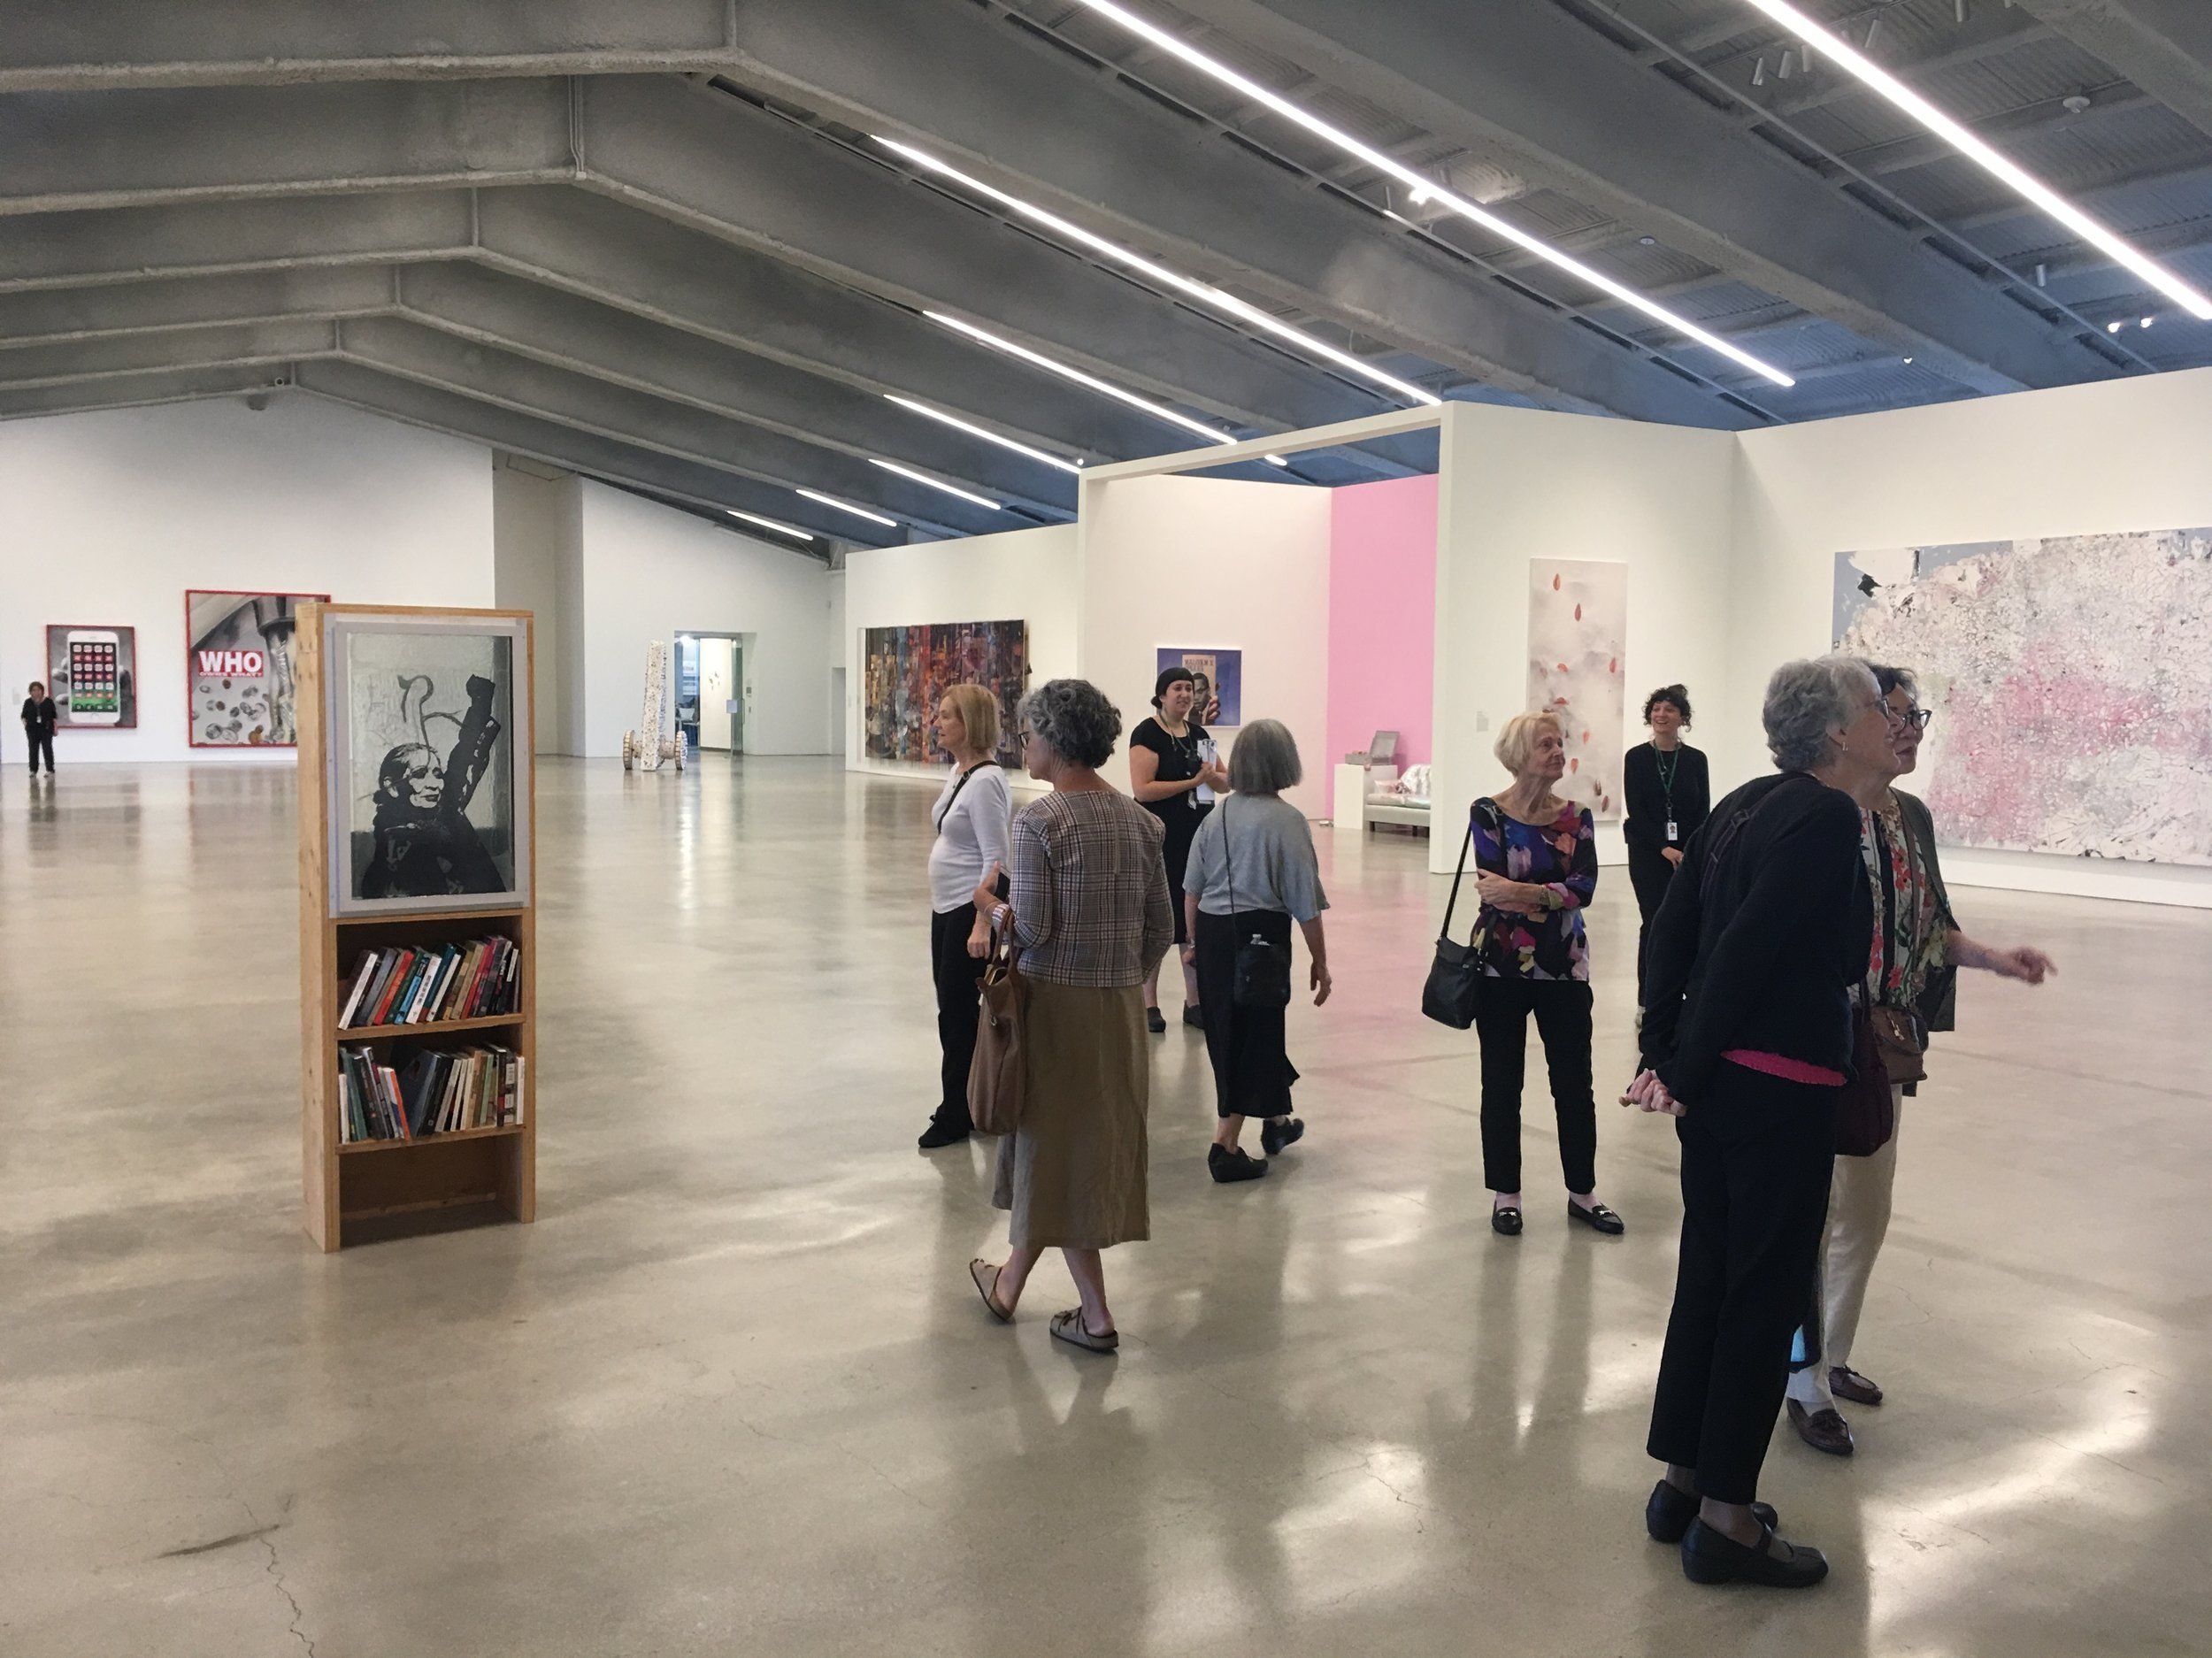 Gallery of Images from Volunteer Field Trip September 2019 to Marciano Art Foundation